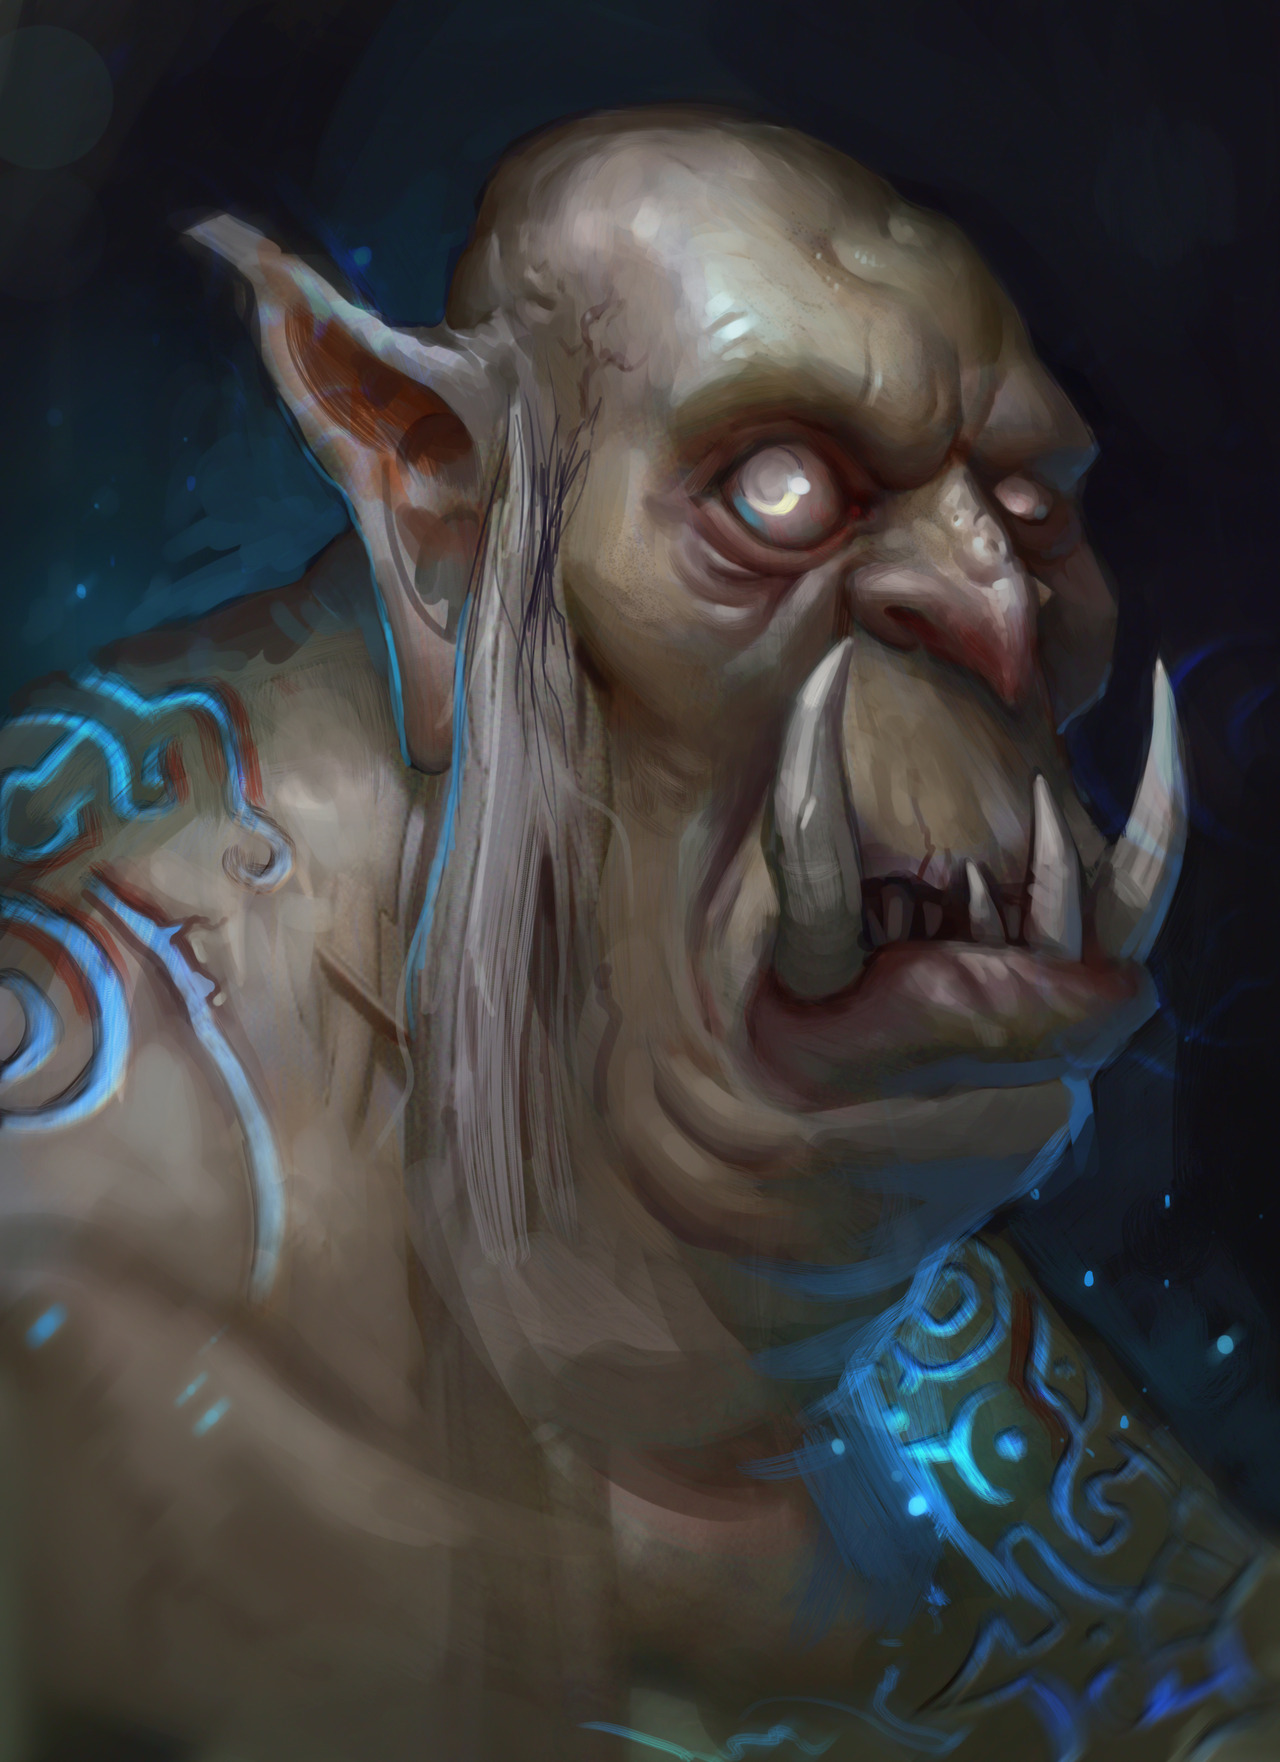 Fine Art: I Don’t Think Hearthstone Is Actually This ‘In Your Face’